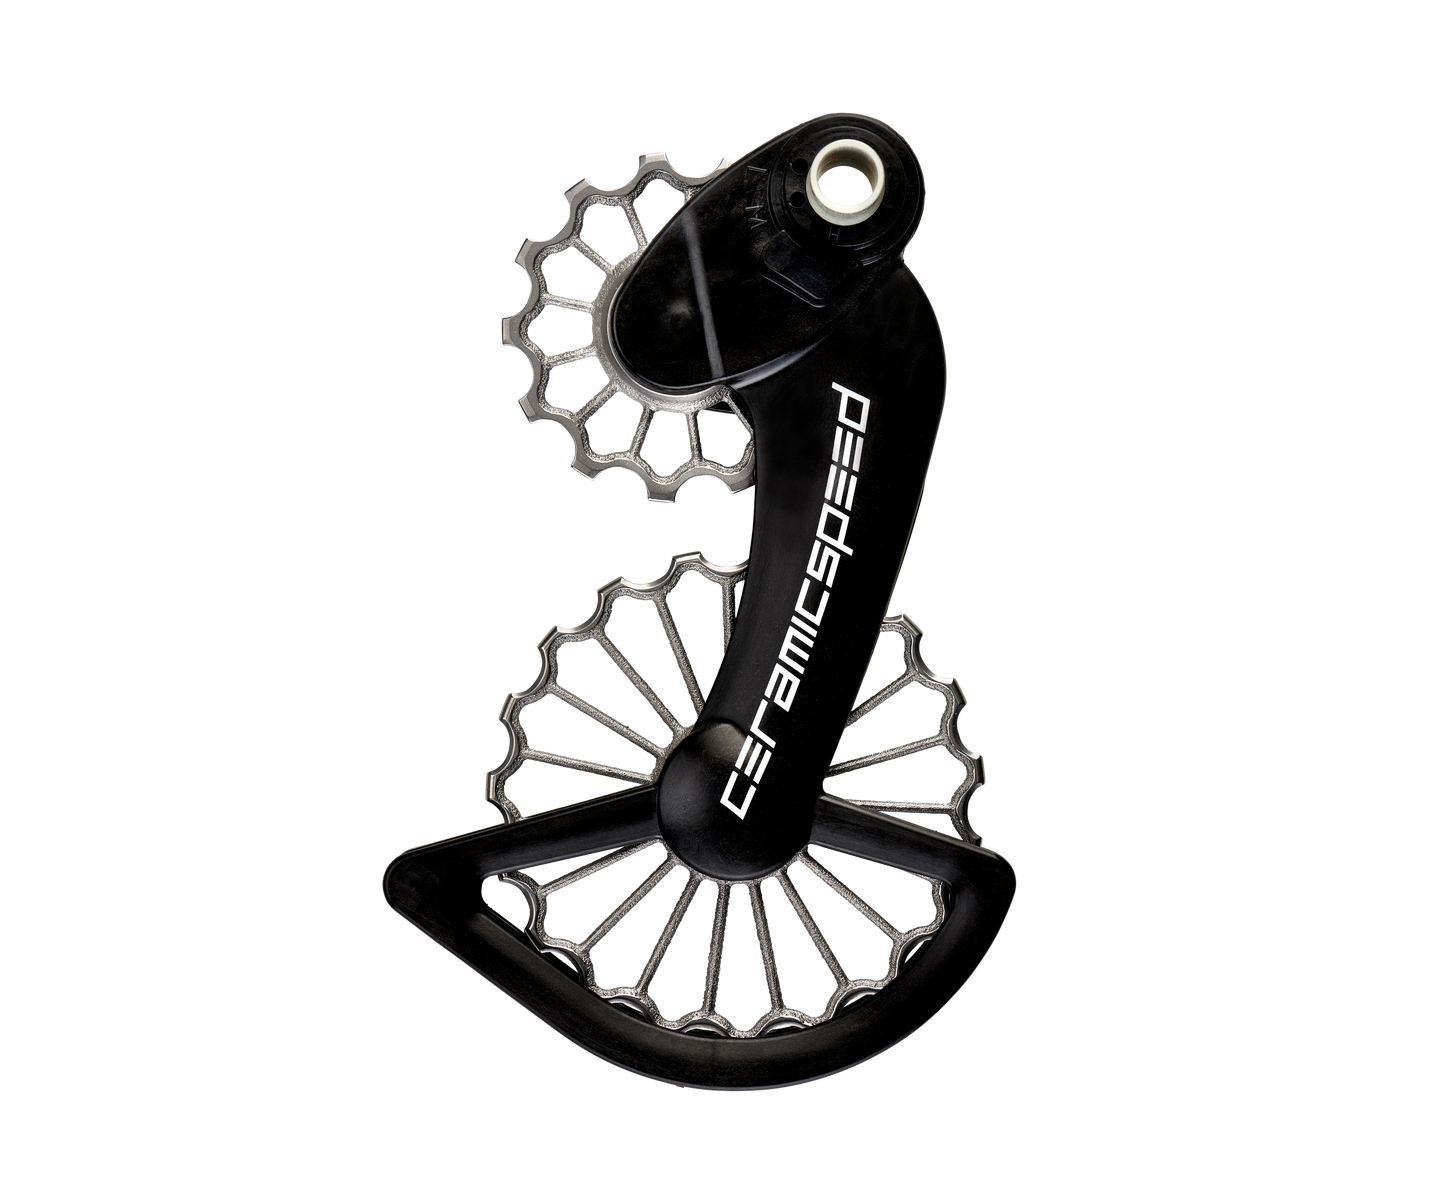 3D Printed Ti OSPW for Campagnolo 12-speed EPS